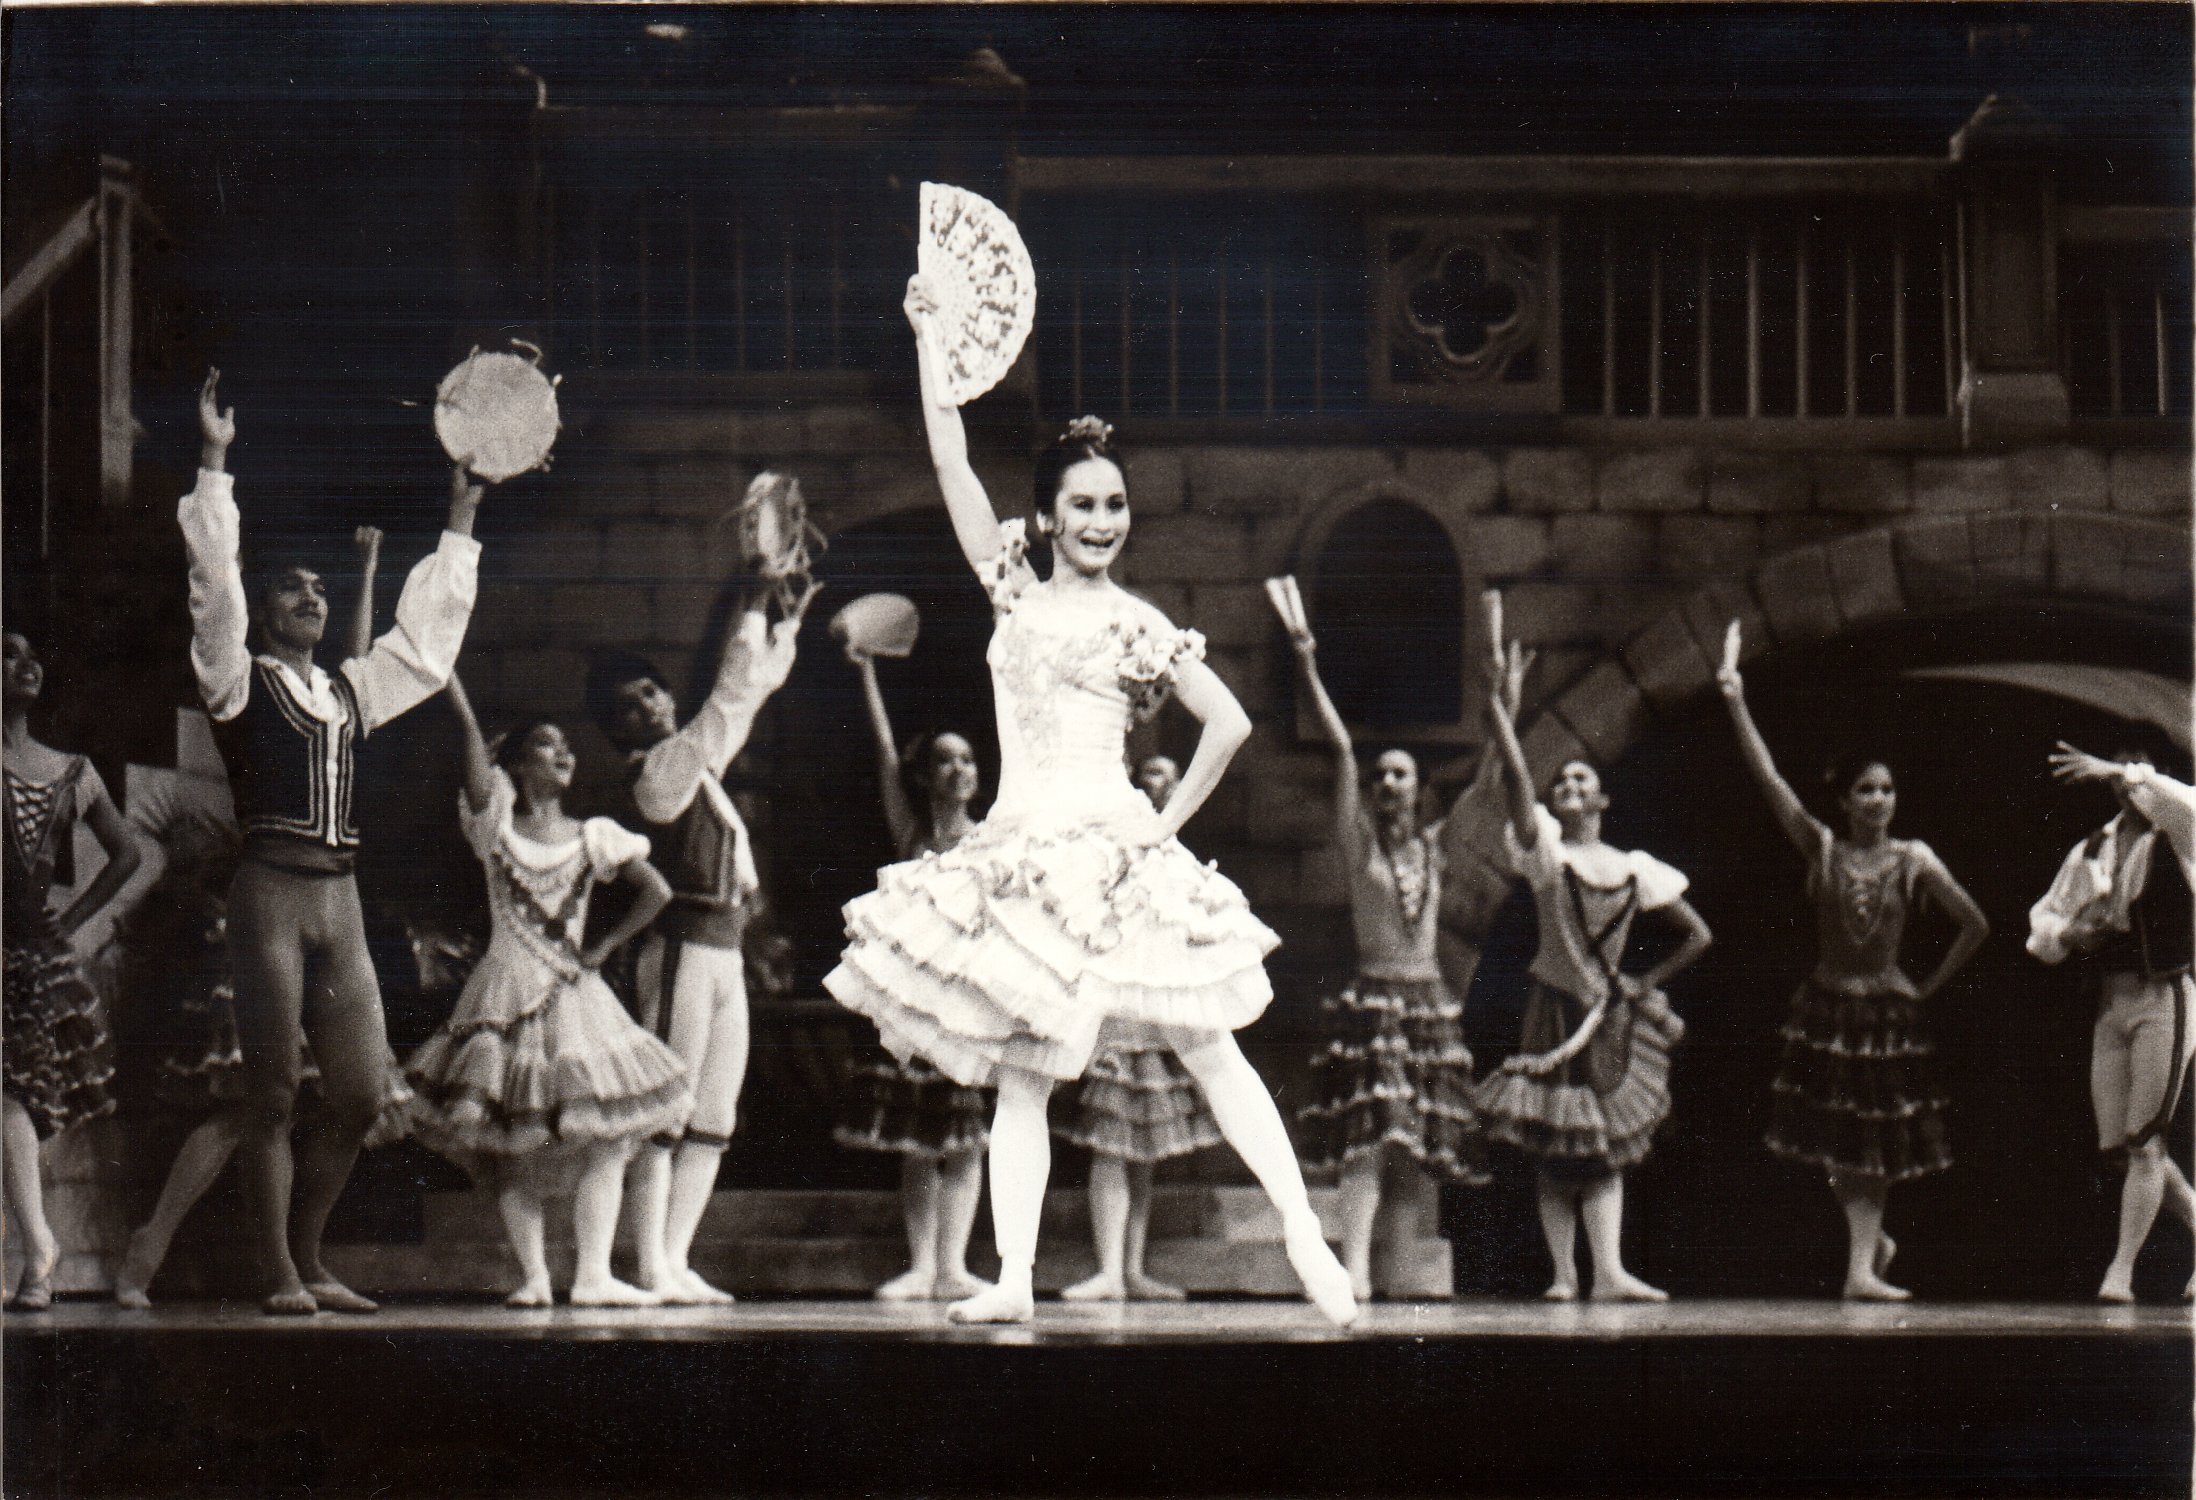    First full-length ballet after returning from Russia as first artist-in-residence of the Cultural Center of the Philippines, with Ballet Philippines, 1986. ”The central character of the ballet, and my favorite role of all, is Kitri, an audacious y